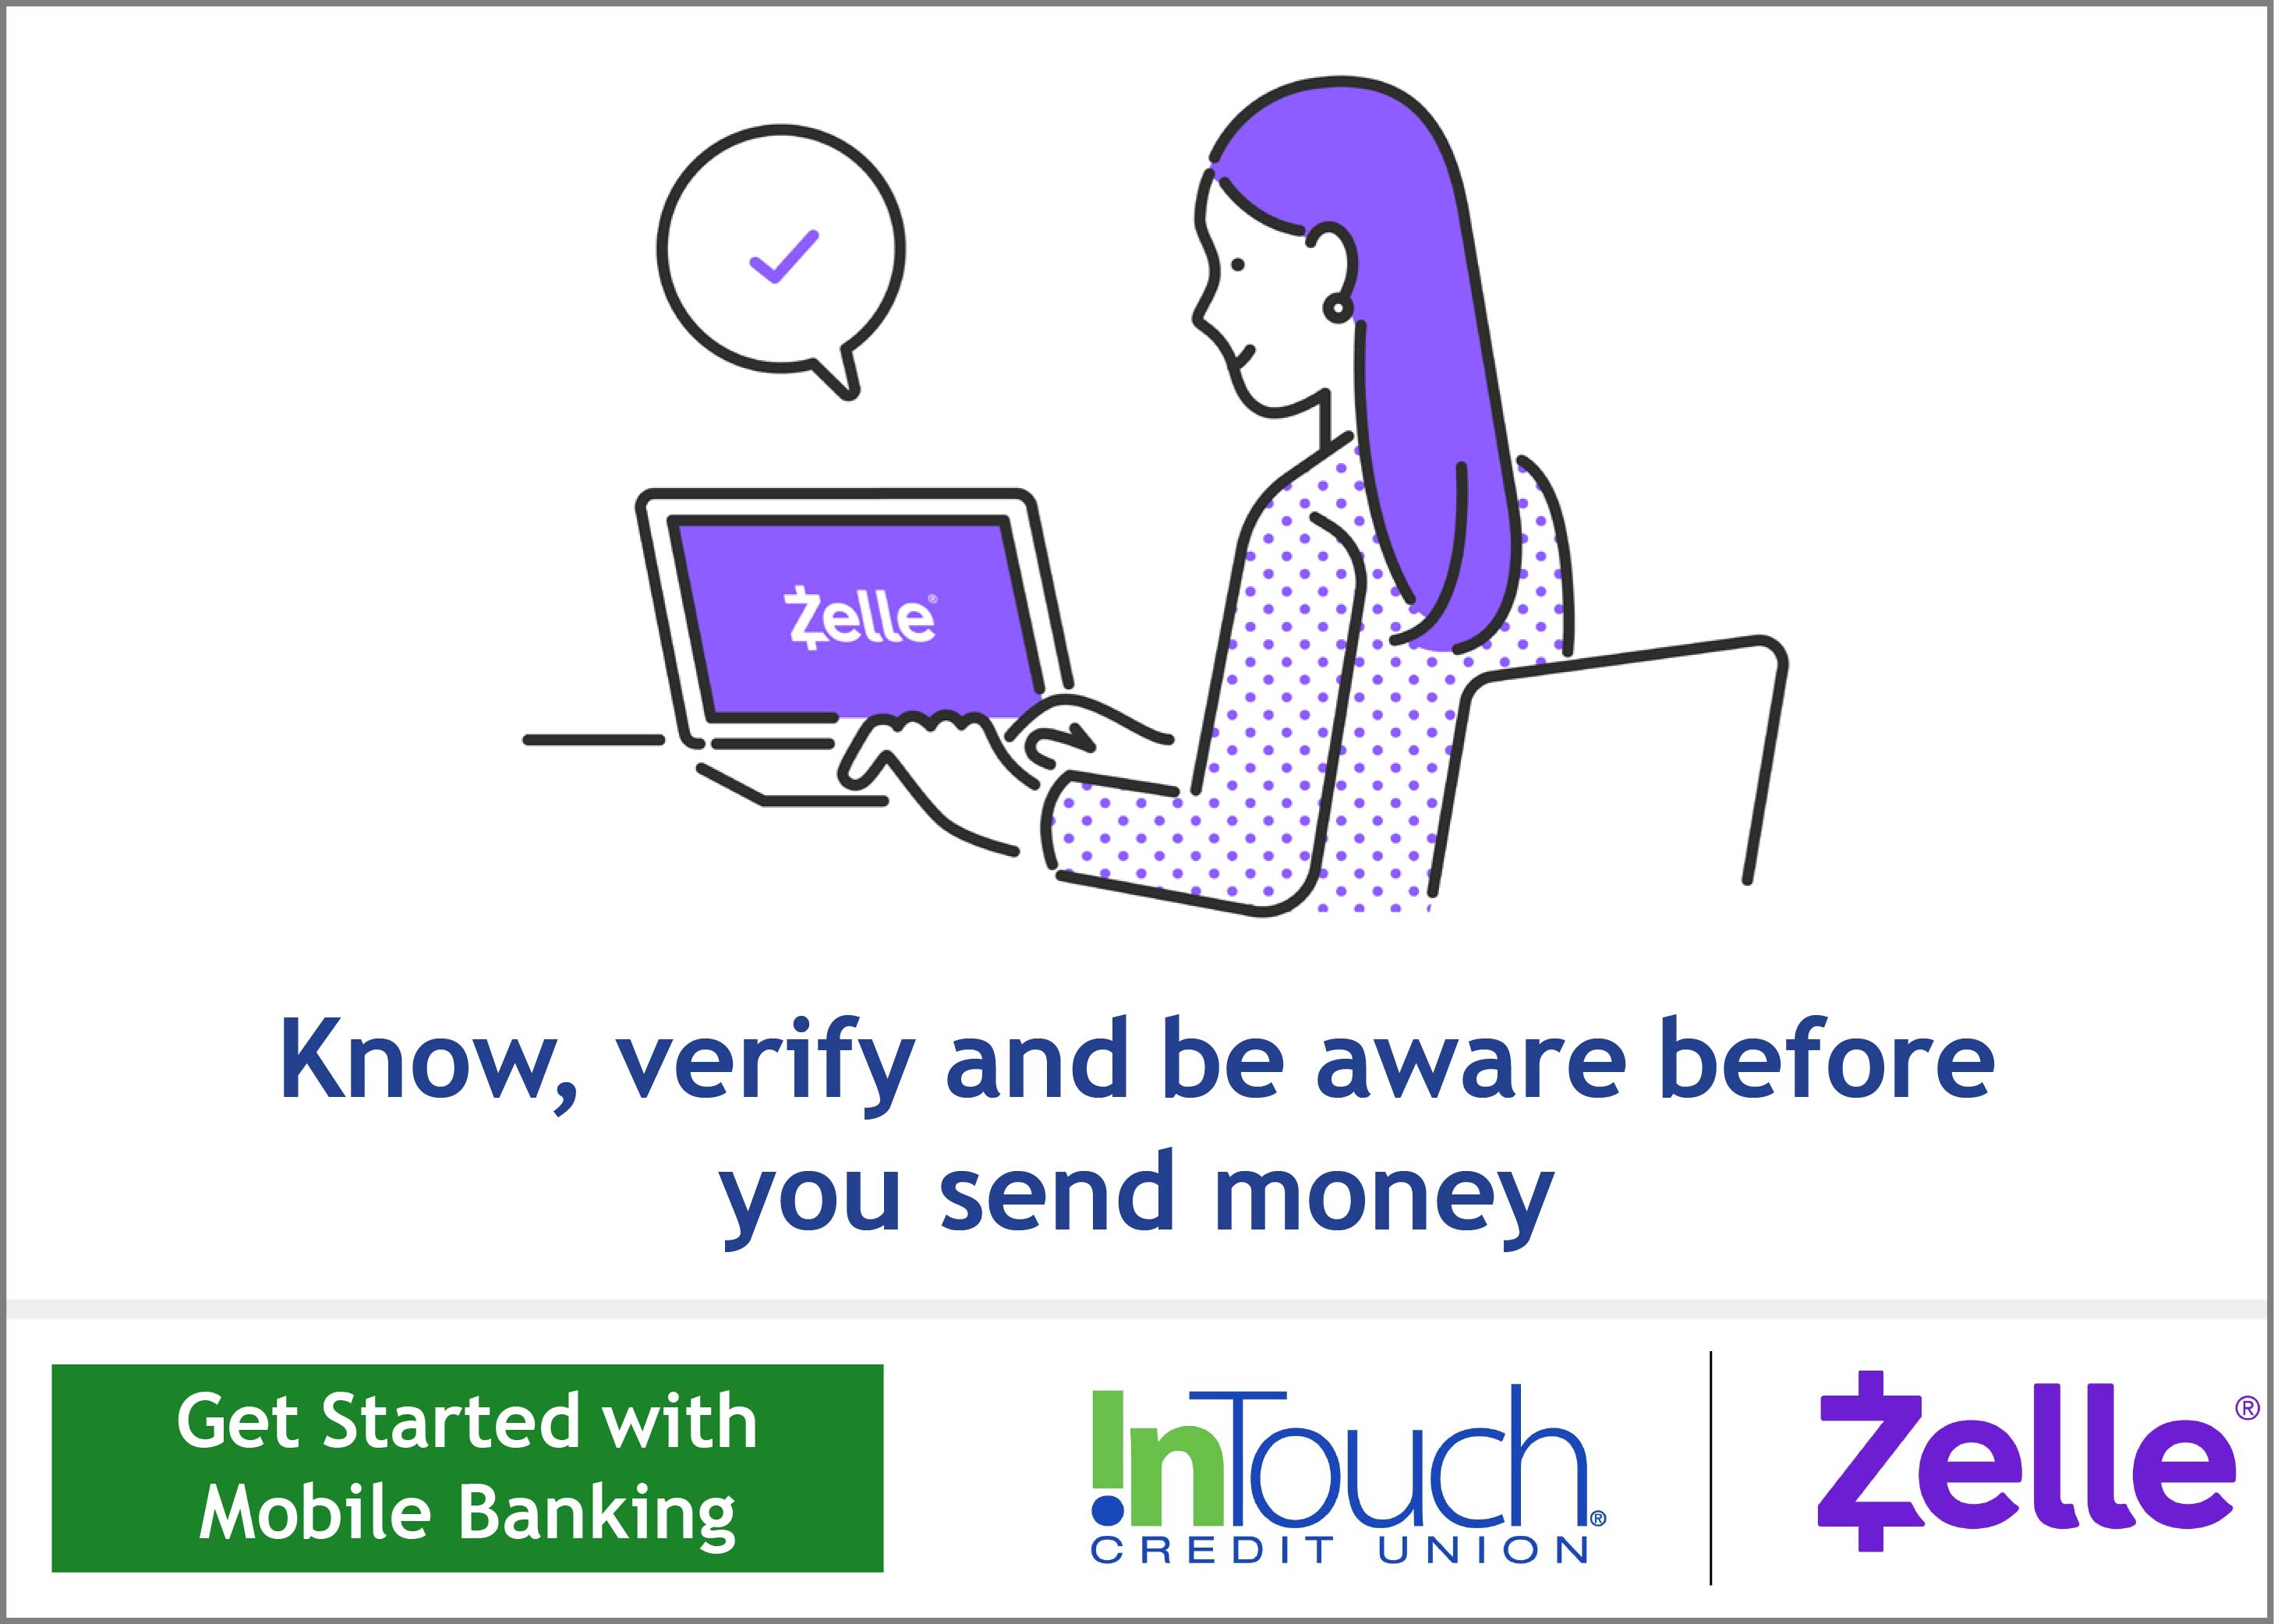 Know, verify and be aware before you send money. Get started with Mobile Banking